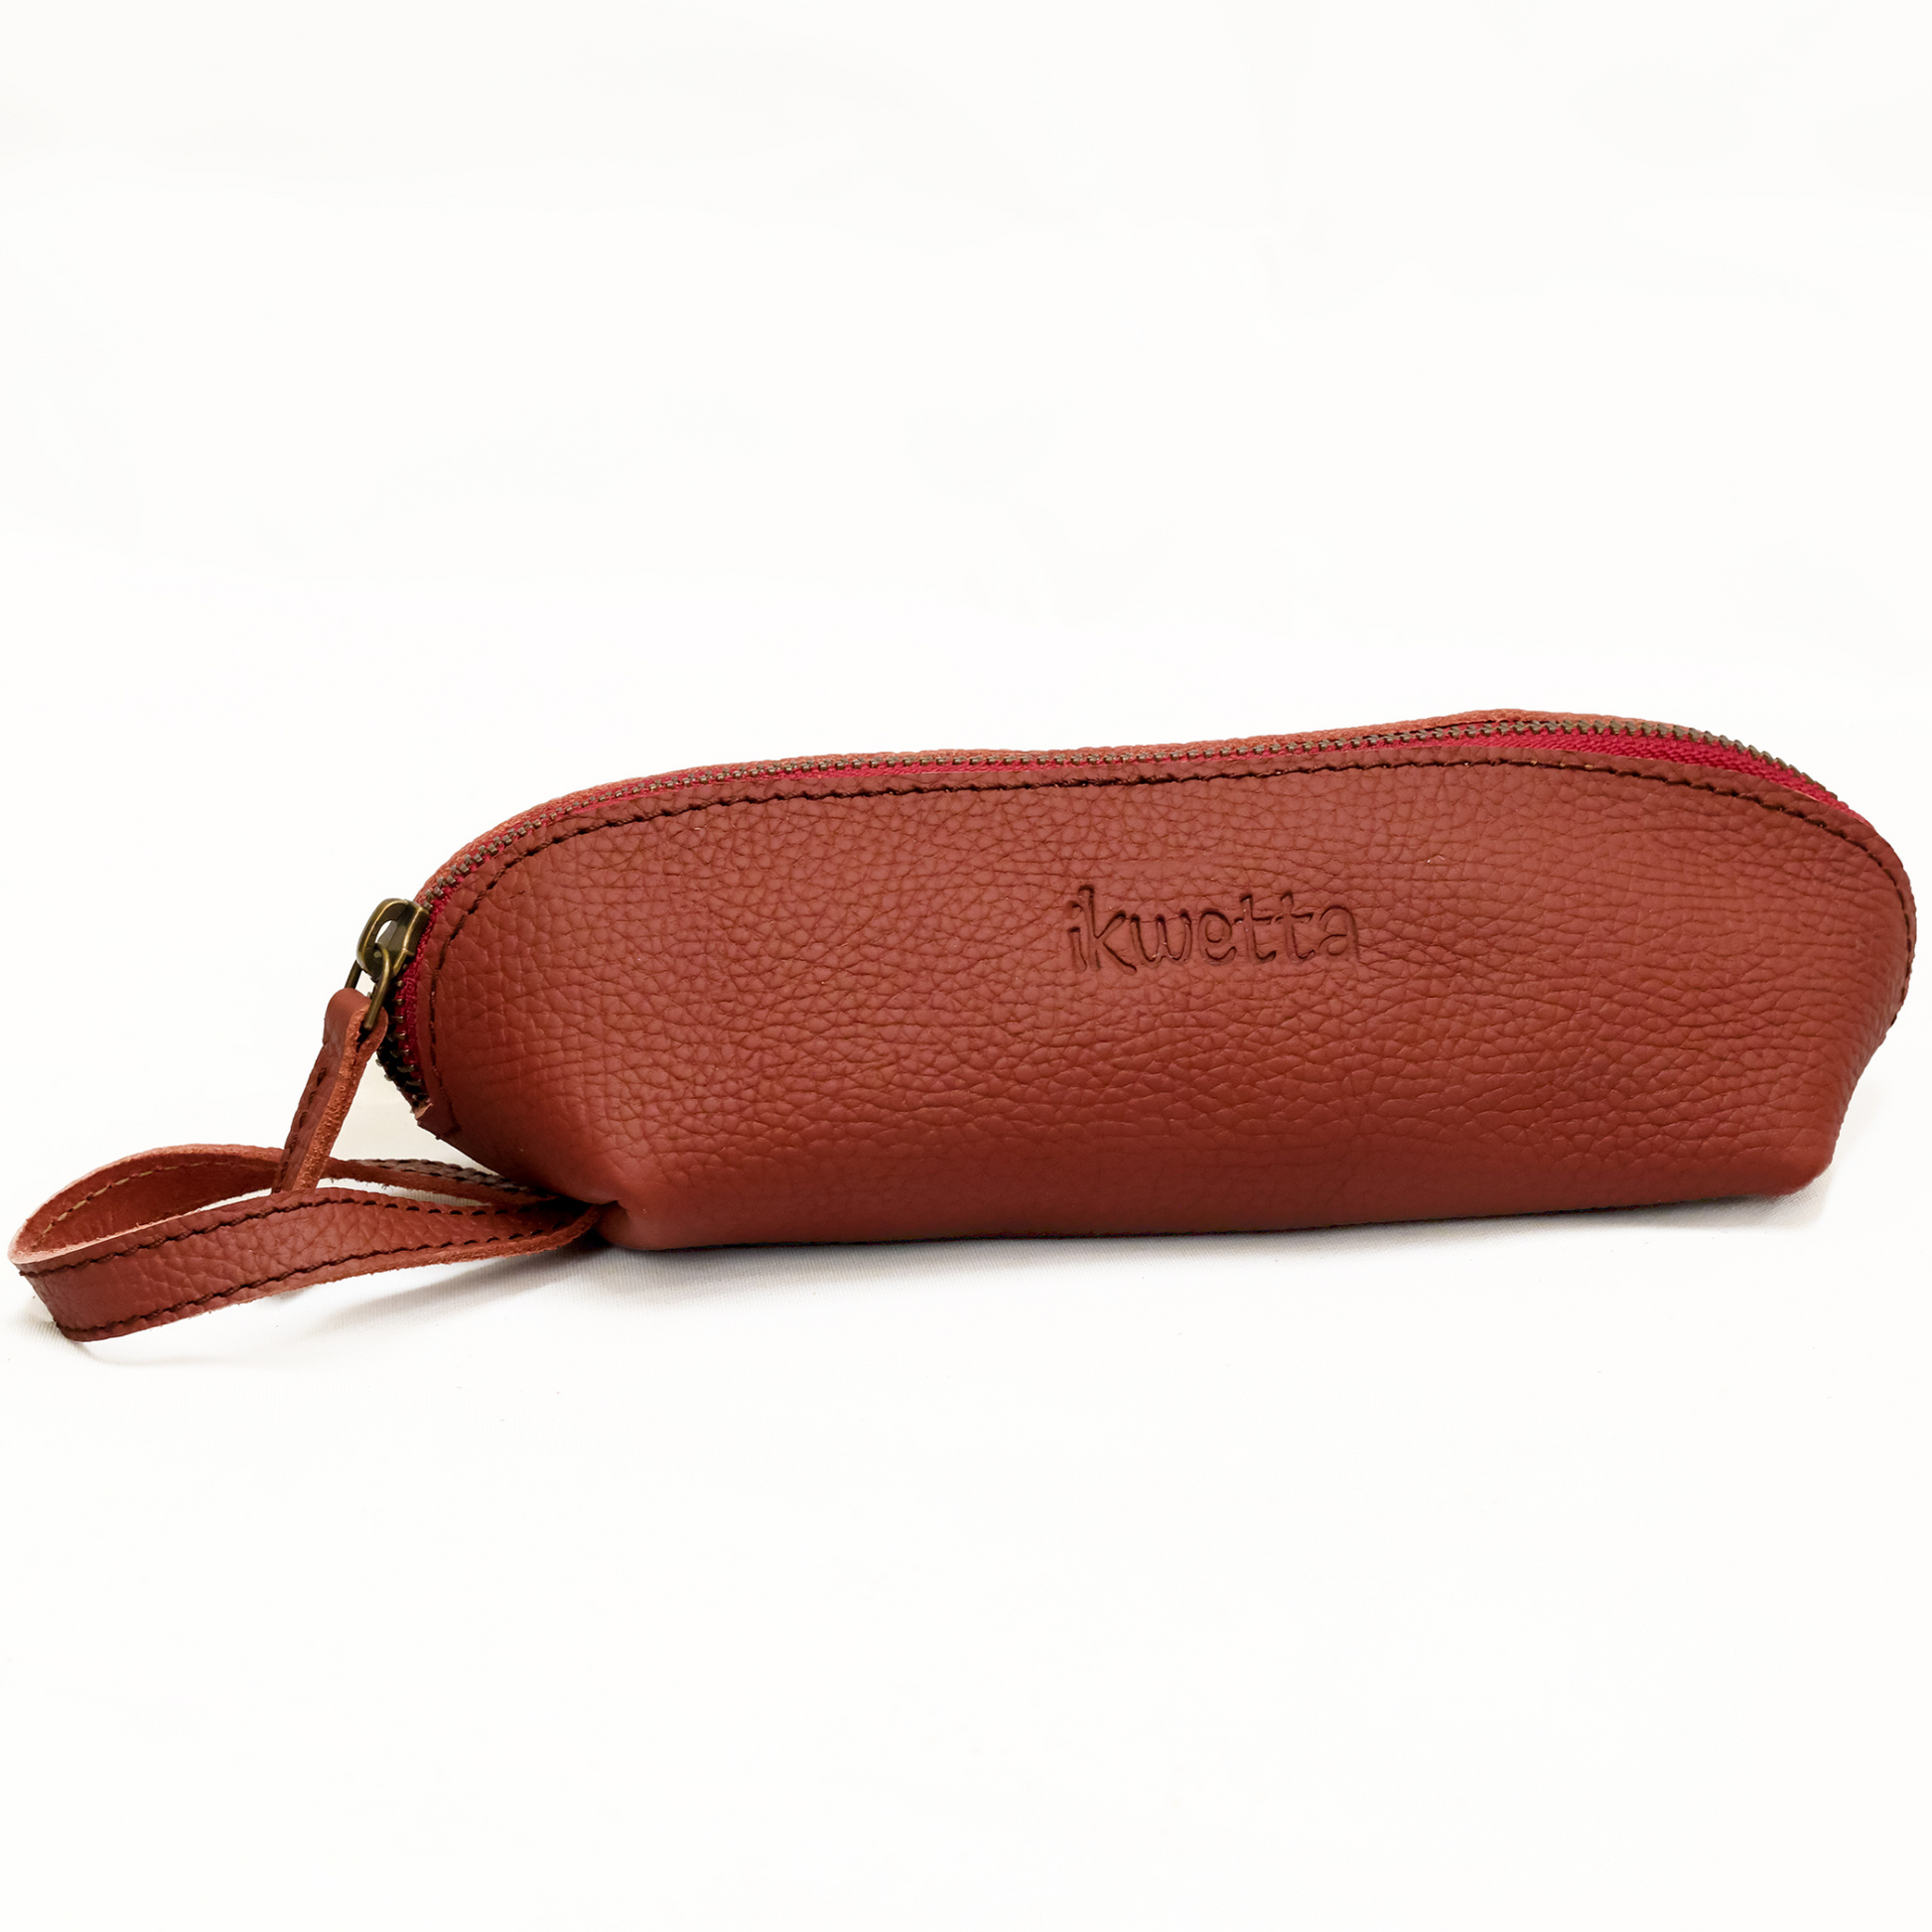 Pencil pouch in firebrick natural dried milled leather